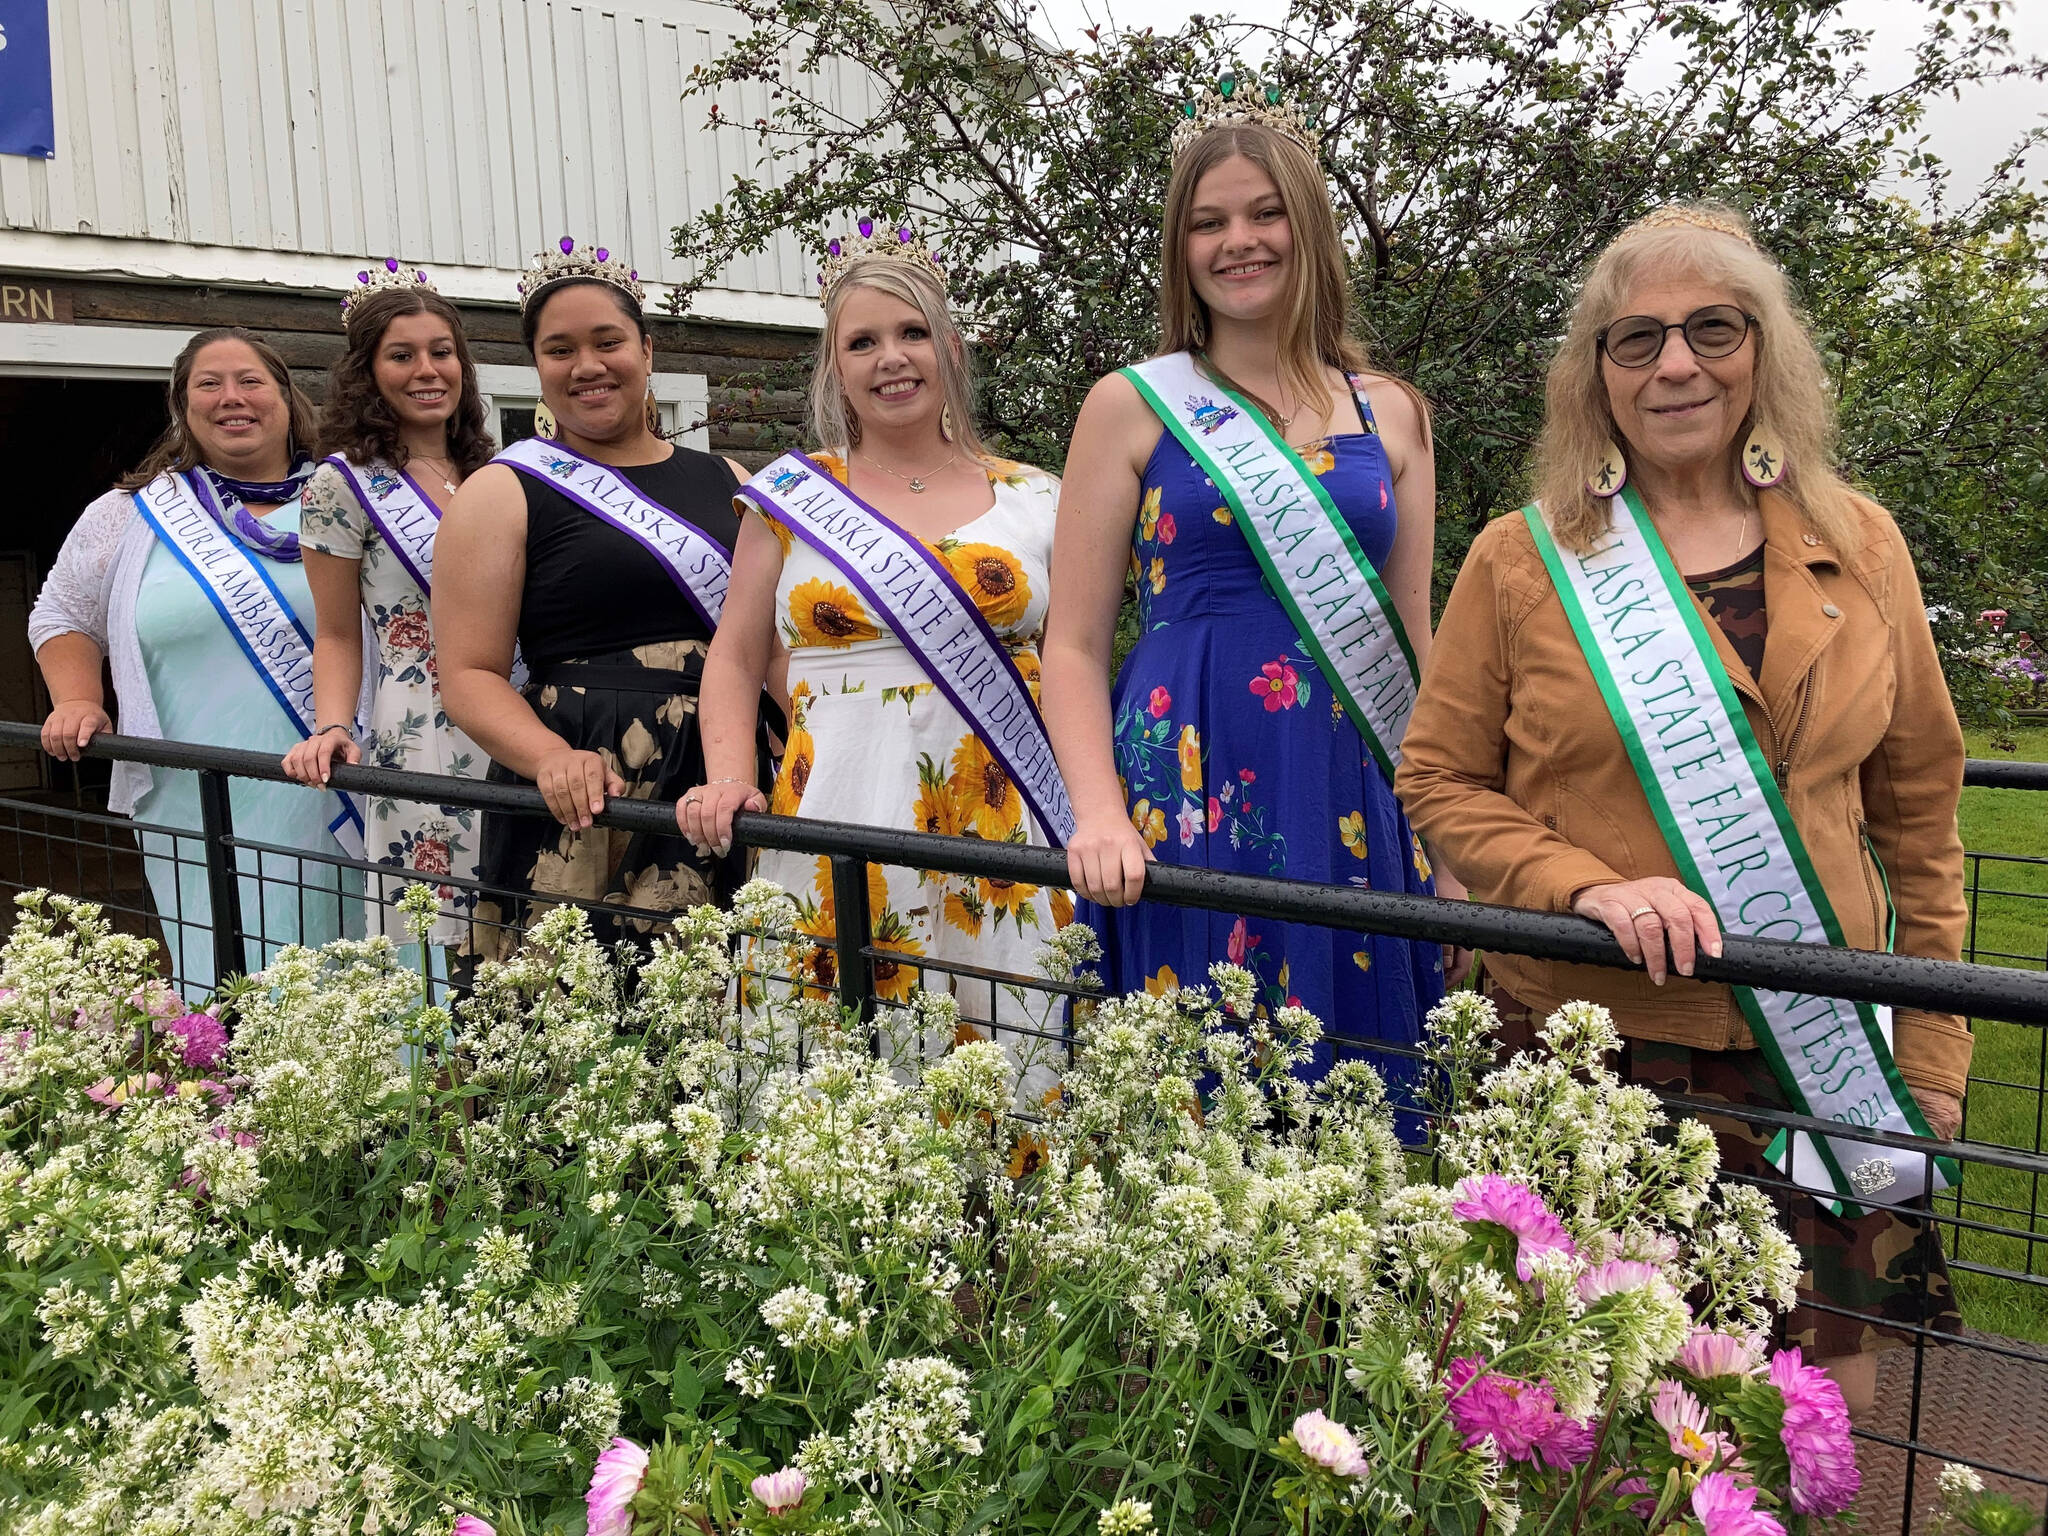 Countess Nona Safra, far right, poses with the other Alaska State Fair Royalty. (Photo provided)